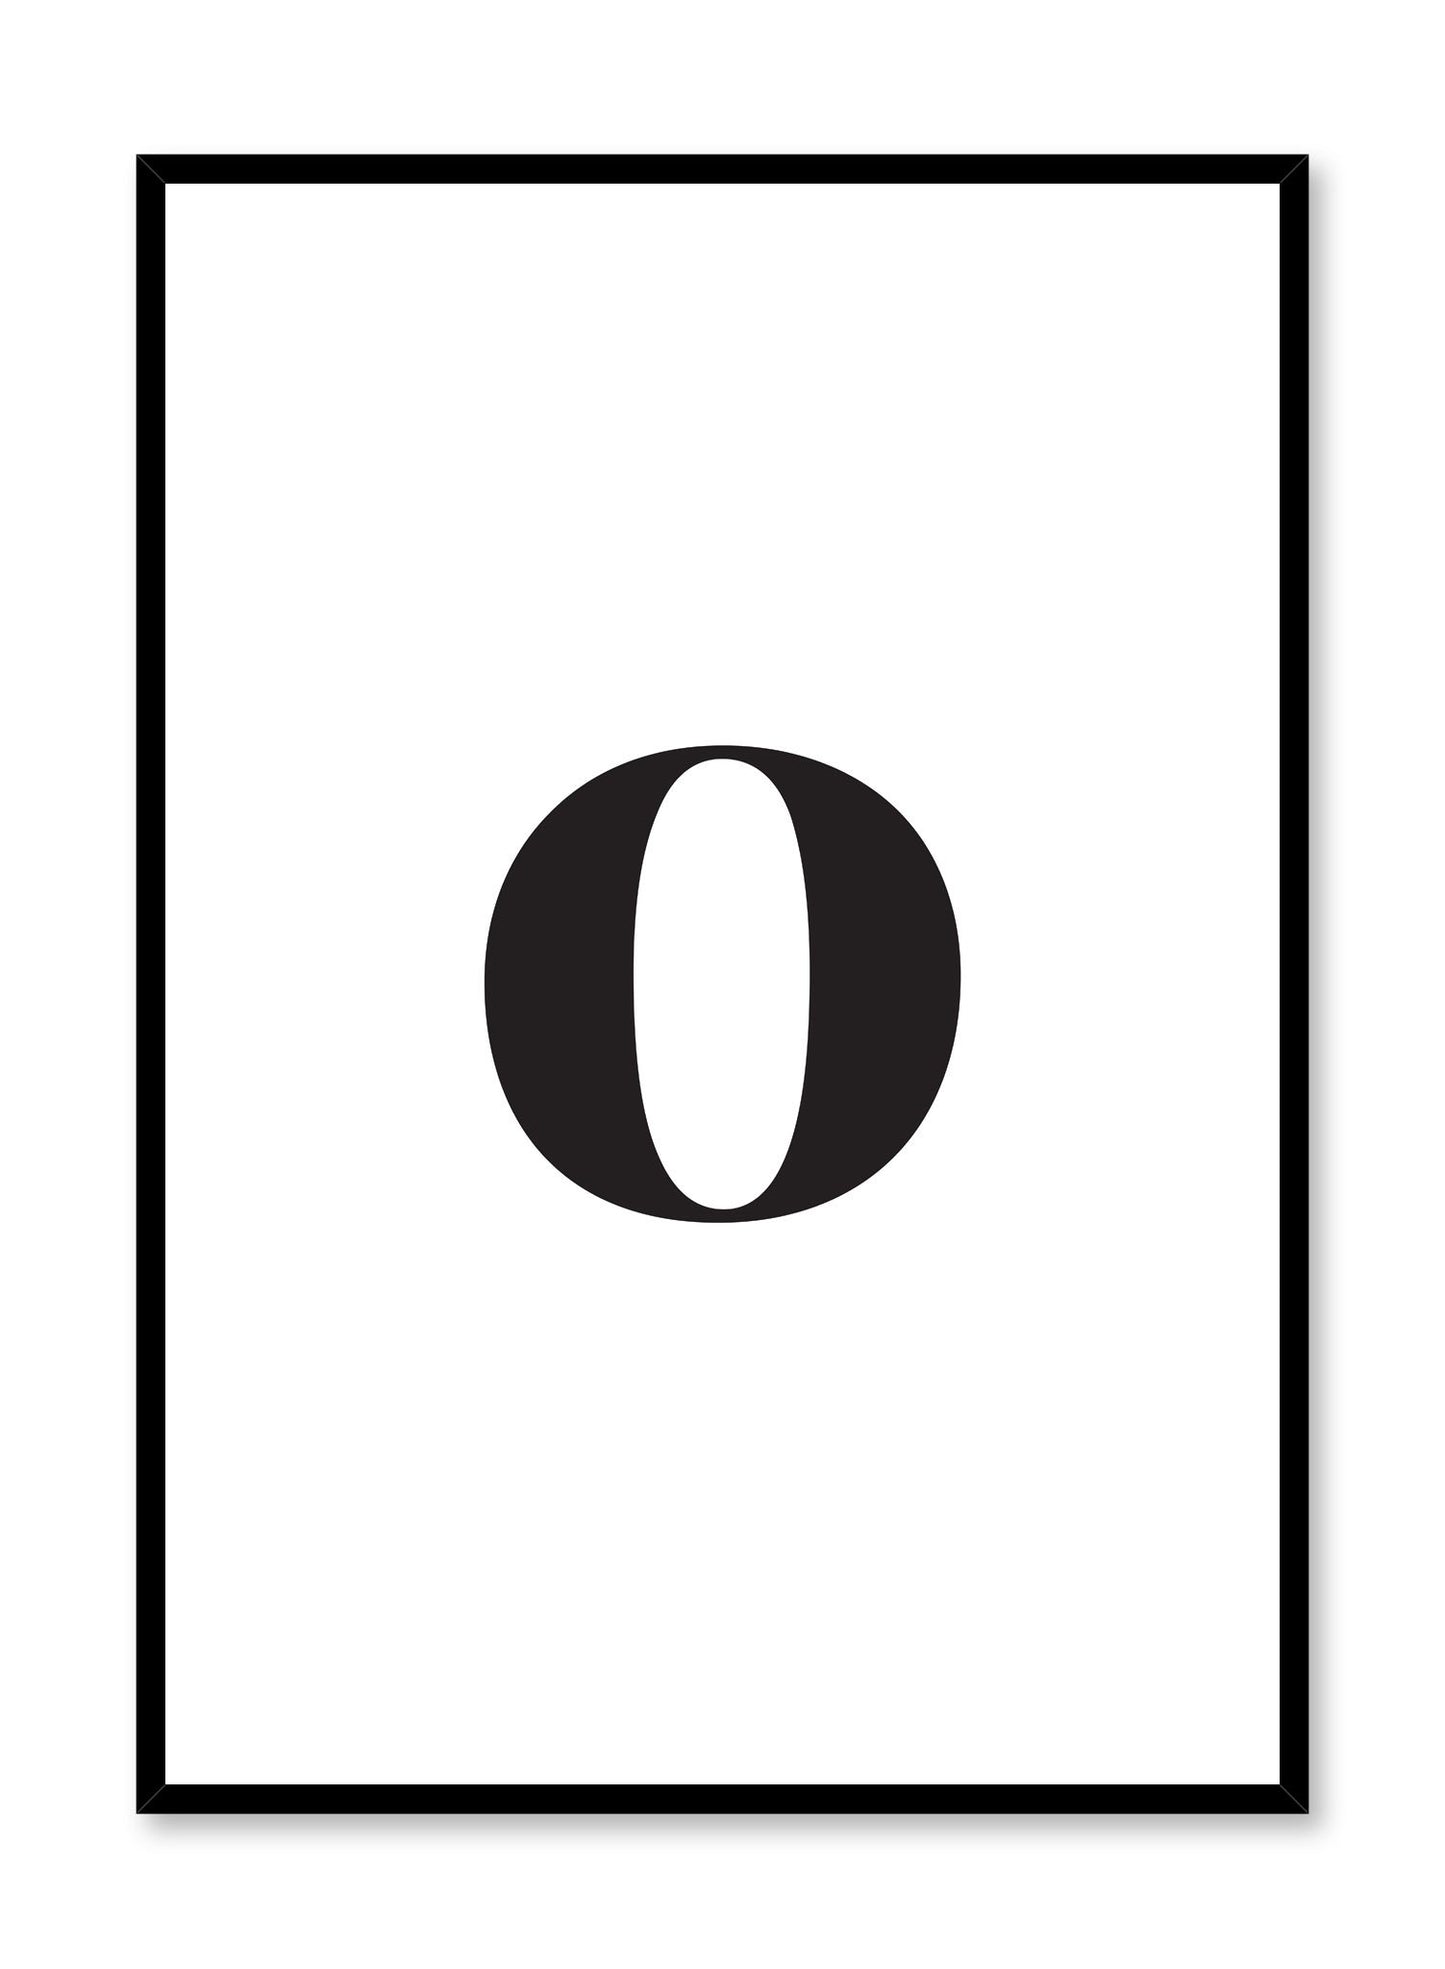 Minimalist black and white typography poster by Opposite Wall with lowercase letter O